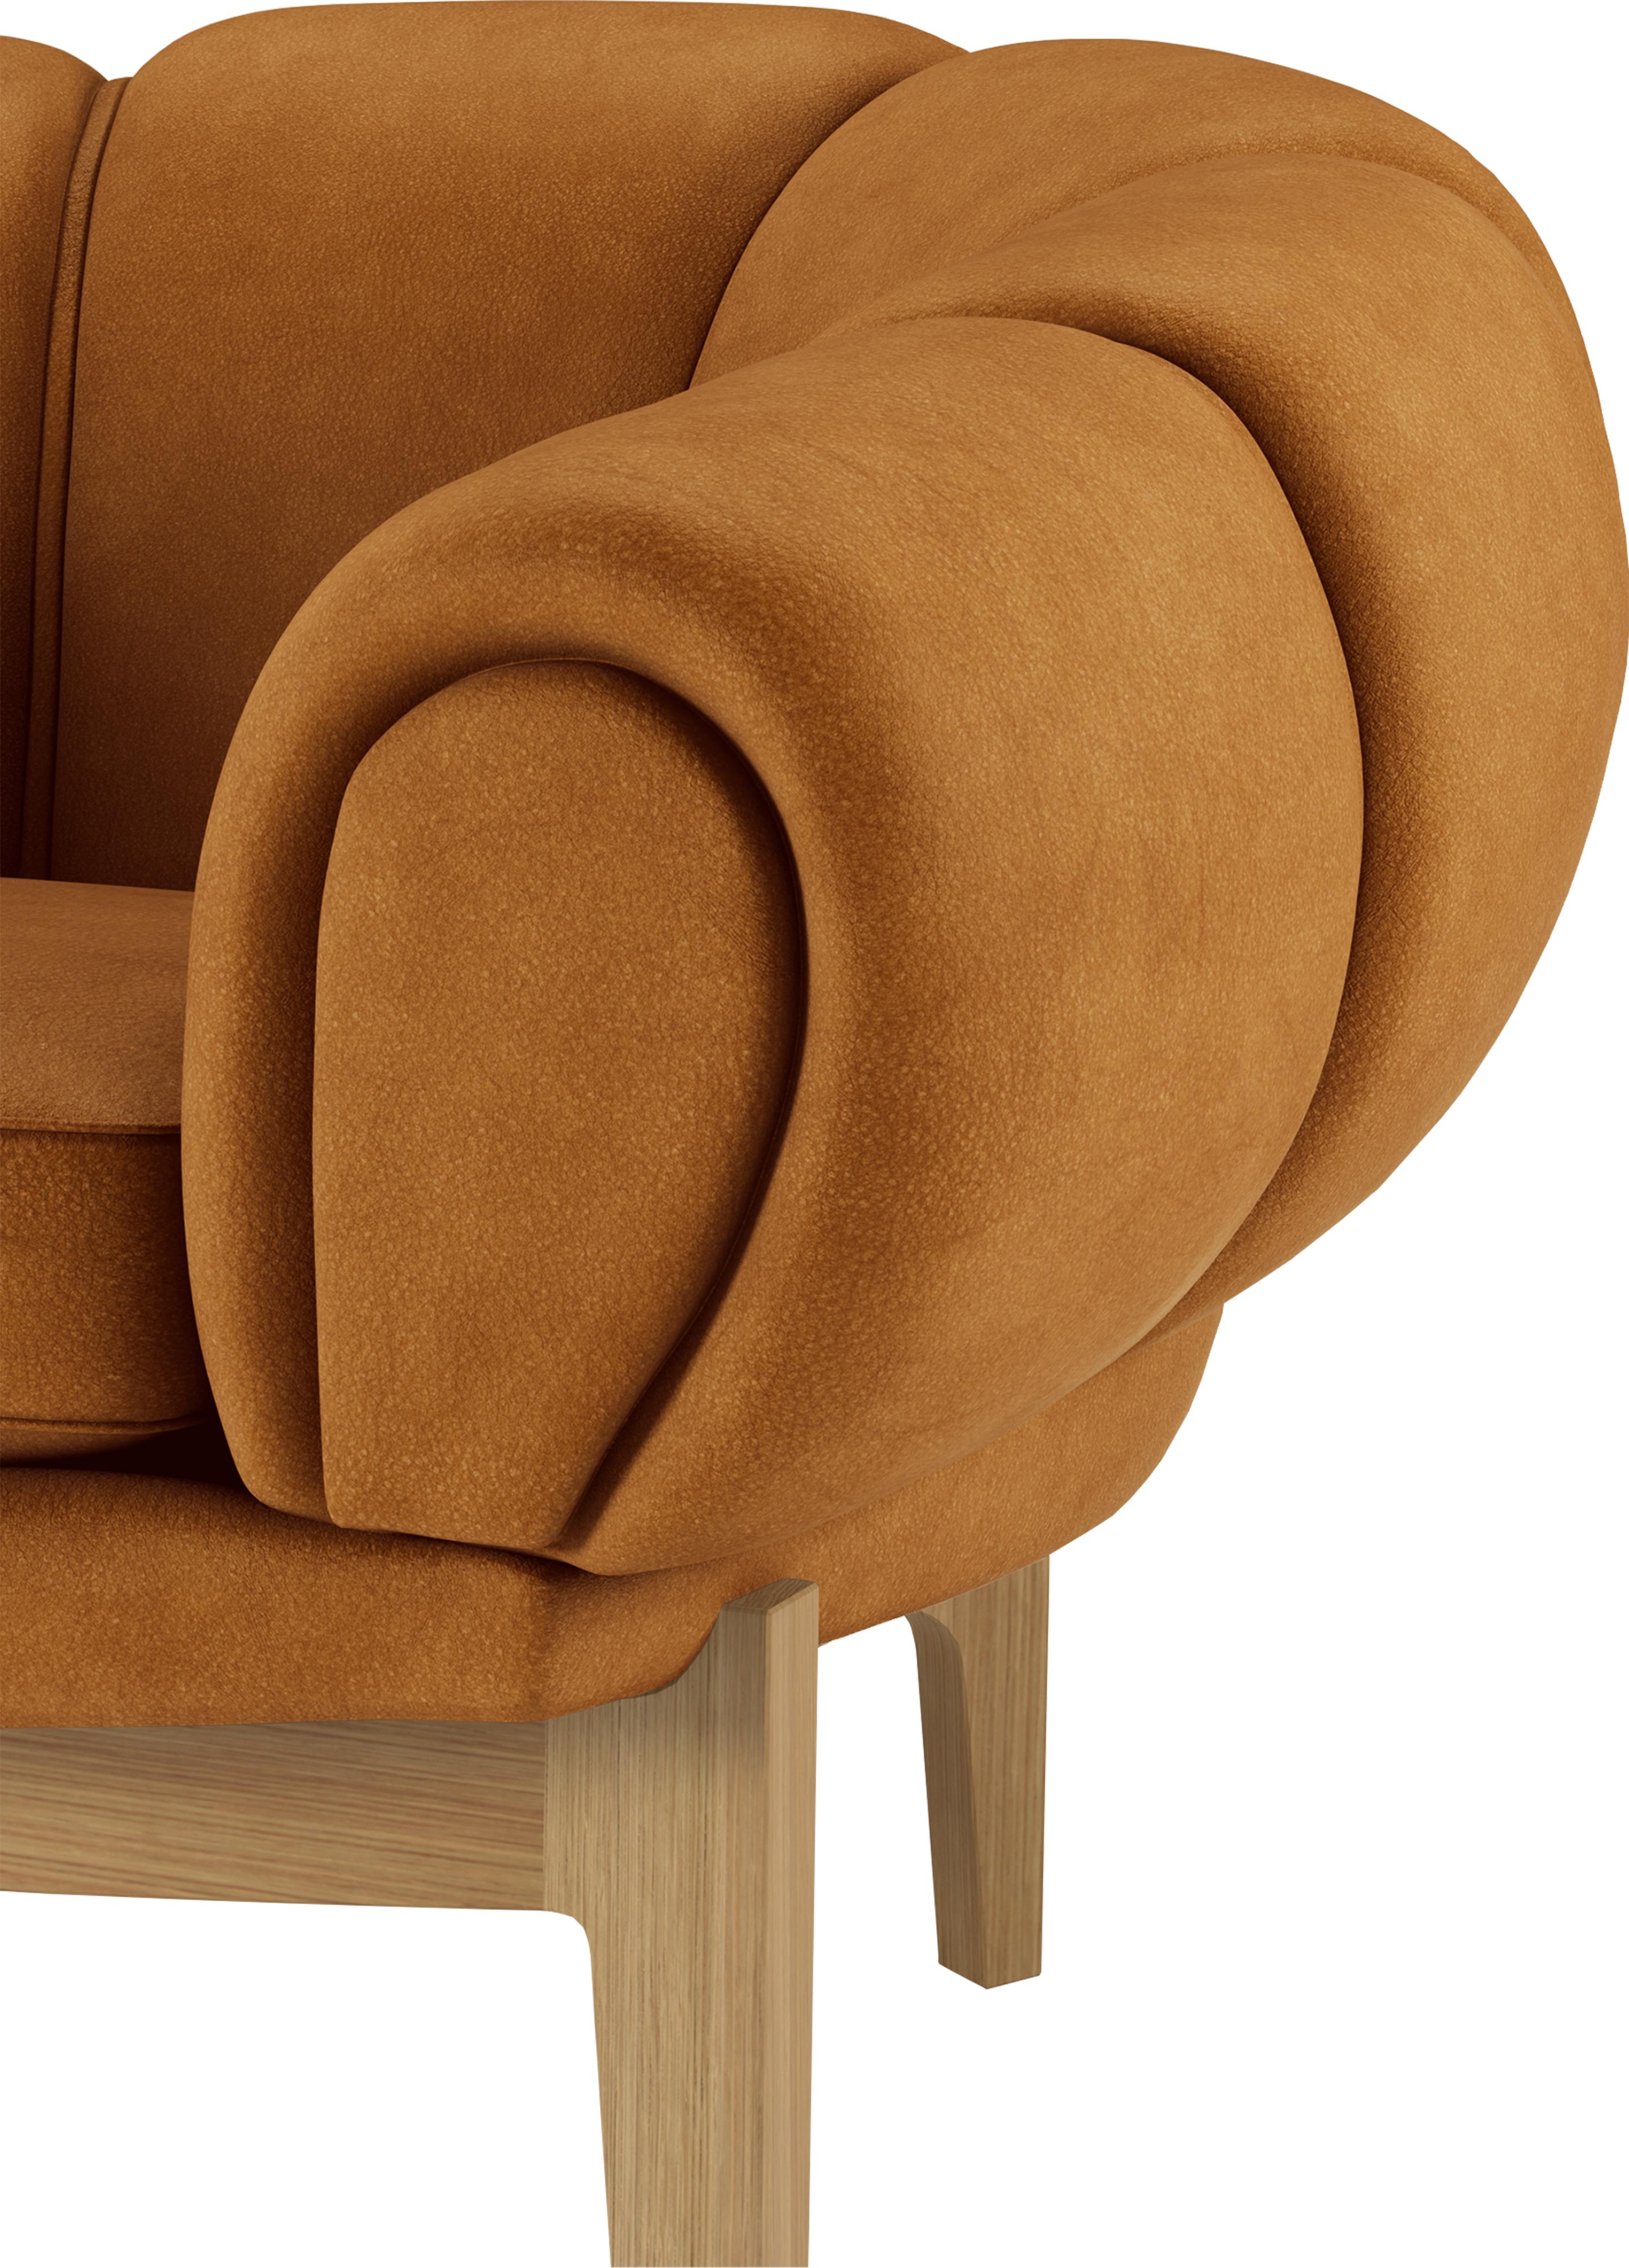 Leather 'Croissant' Sofa by Illum Wikkelsø for Gubi with Walnut Legs For Sale 6